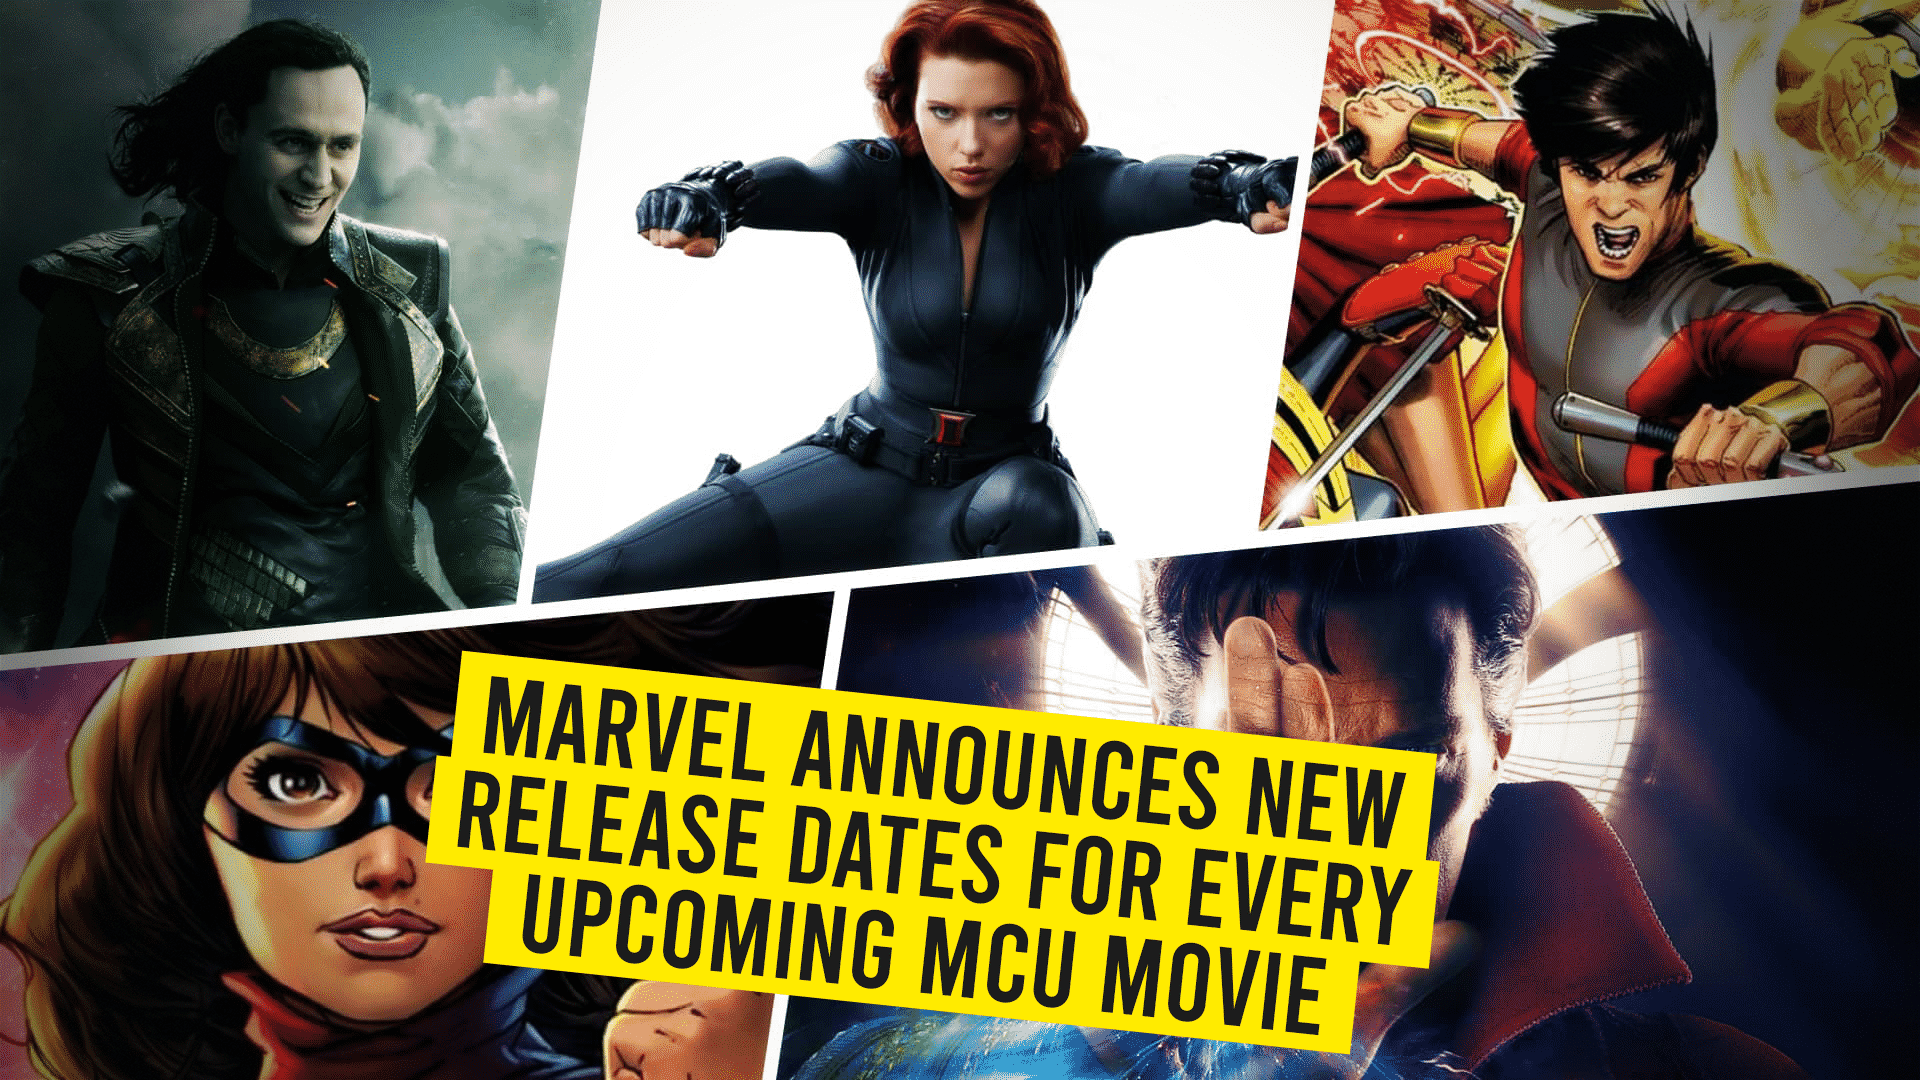 Marvel Announces New Release Dates For Every Upcoming MCU Movie.